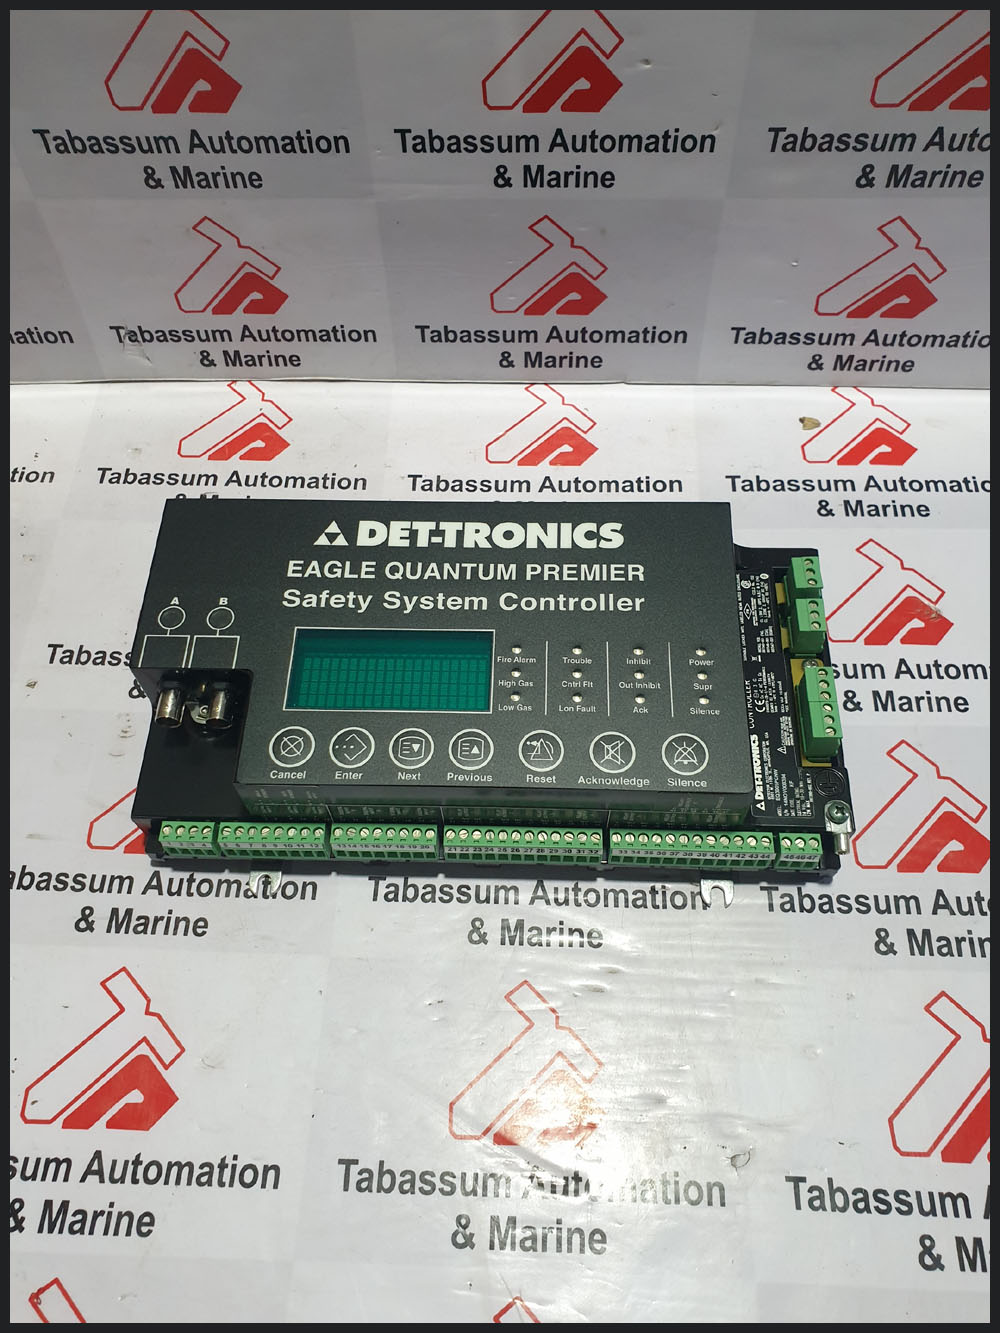 Det-Tronics  Fire and Gas Safety Systems